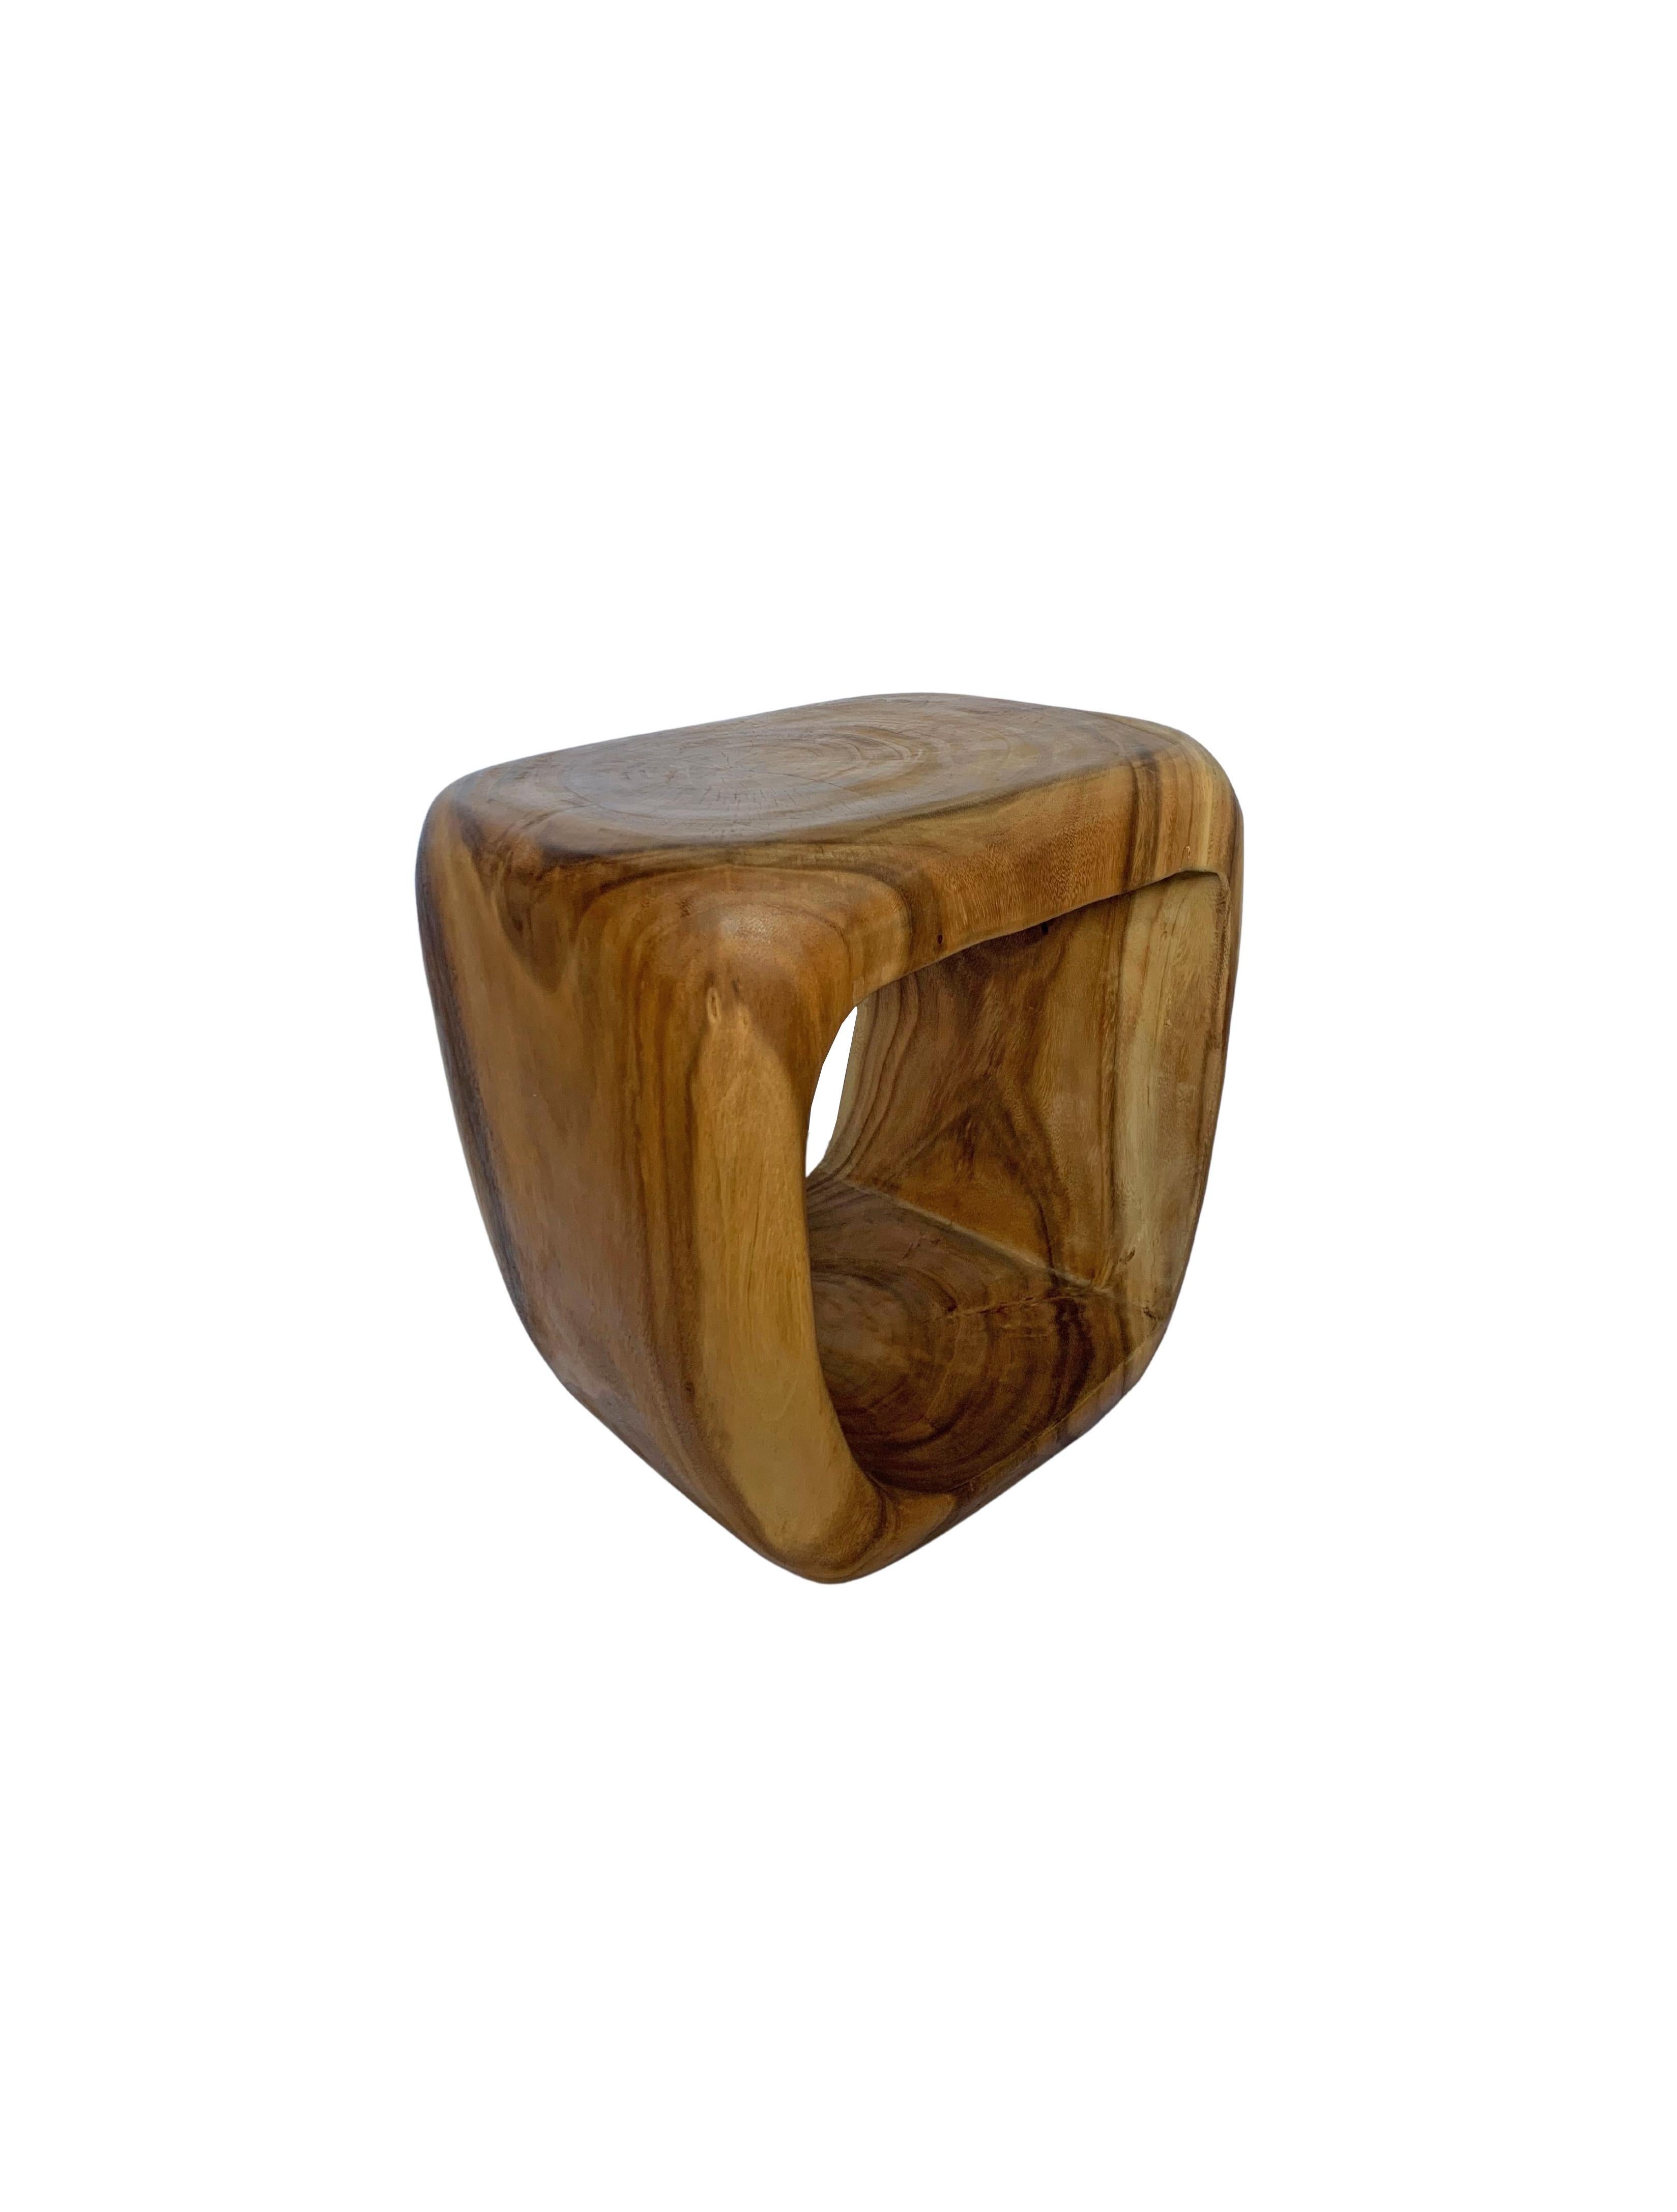 Indonesian Sculptural Side Table / Stool Solid Mango Wood For Sale